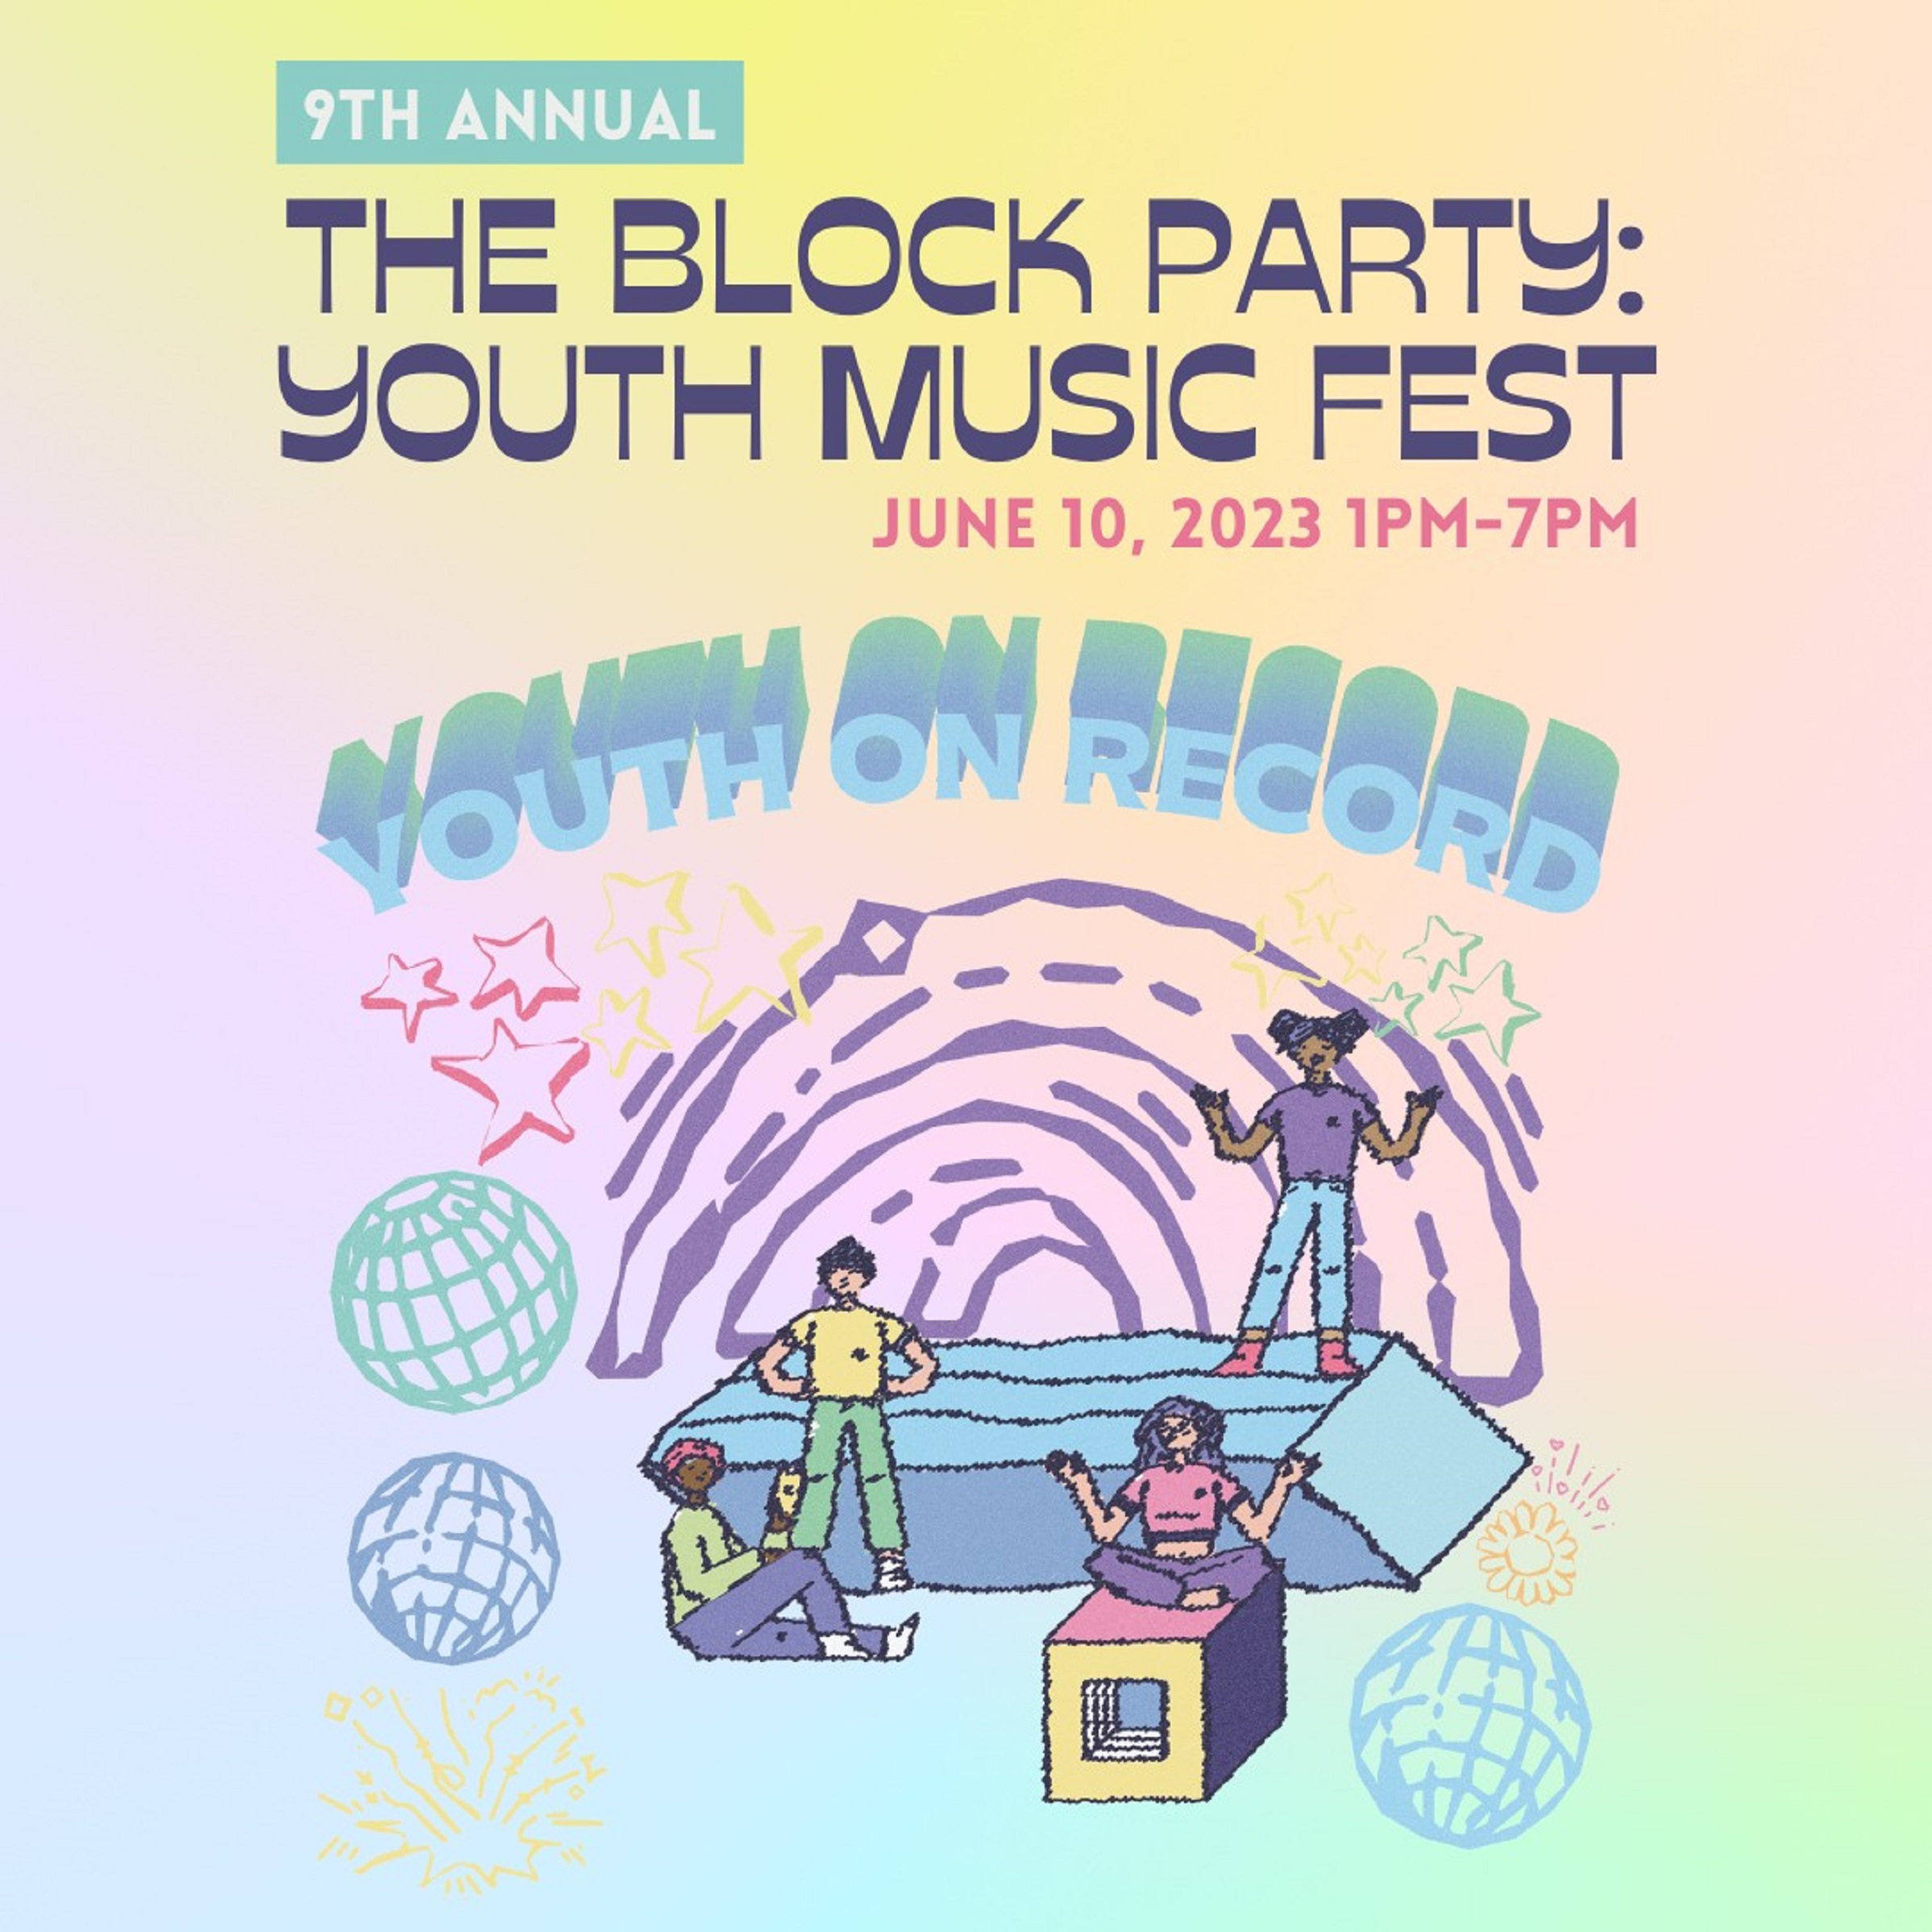 Youth on Record Celebrates 9th Annual Block Party